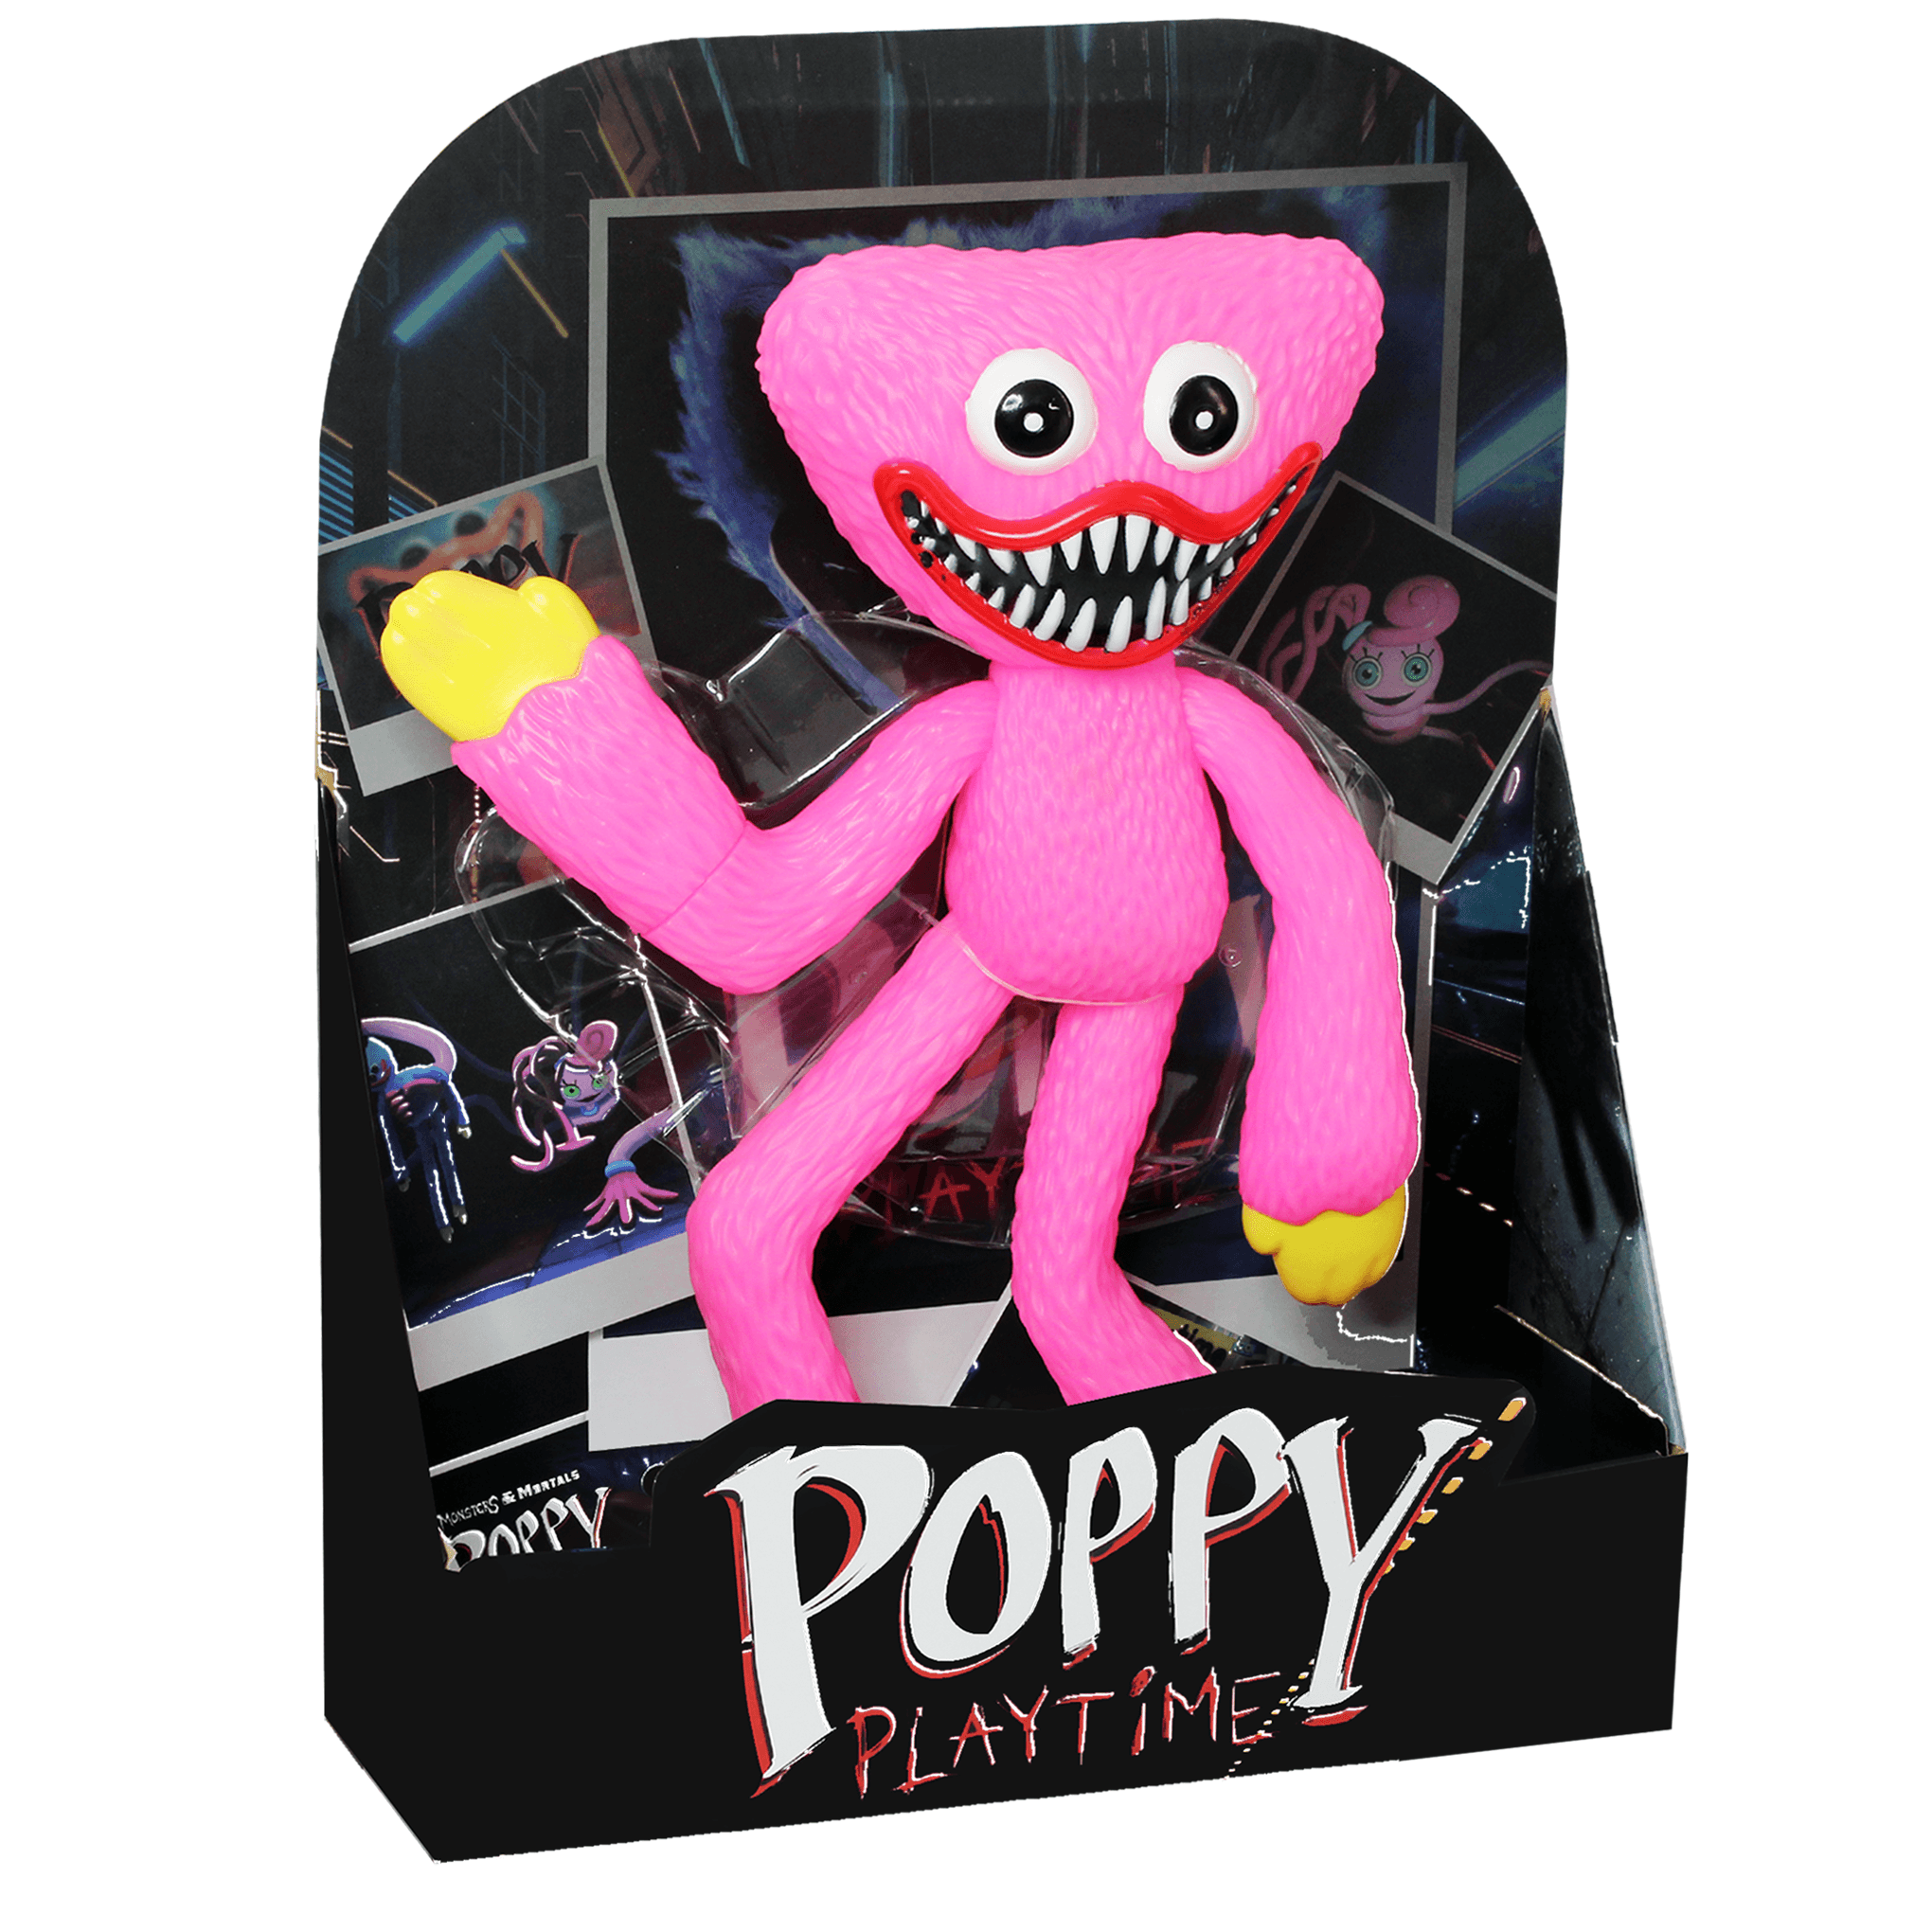 Poppy Playtime Monsters And Mortals Action Figure - Huggy Wuggy - BumbleToys - 5-7 Years, Boys, Girls, huggy wuggy, Monsters, Toy Land